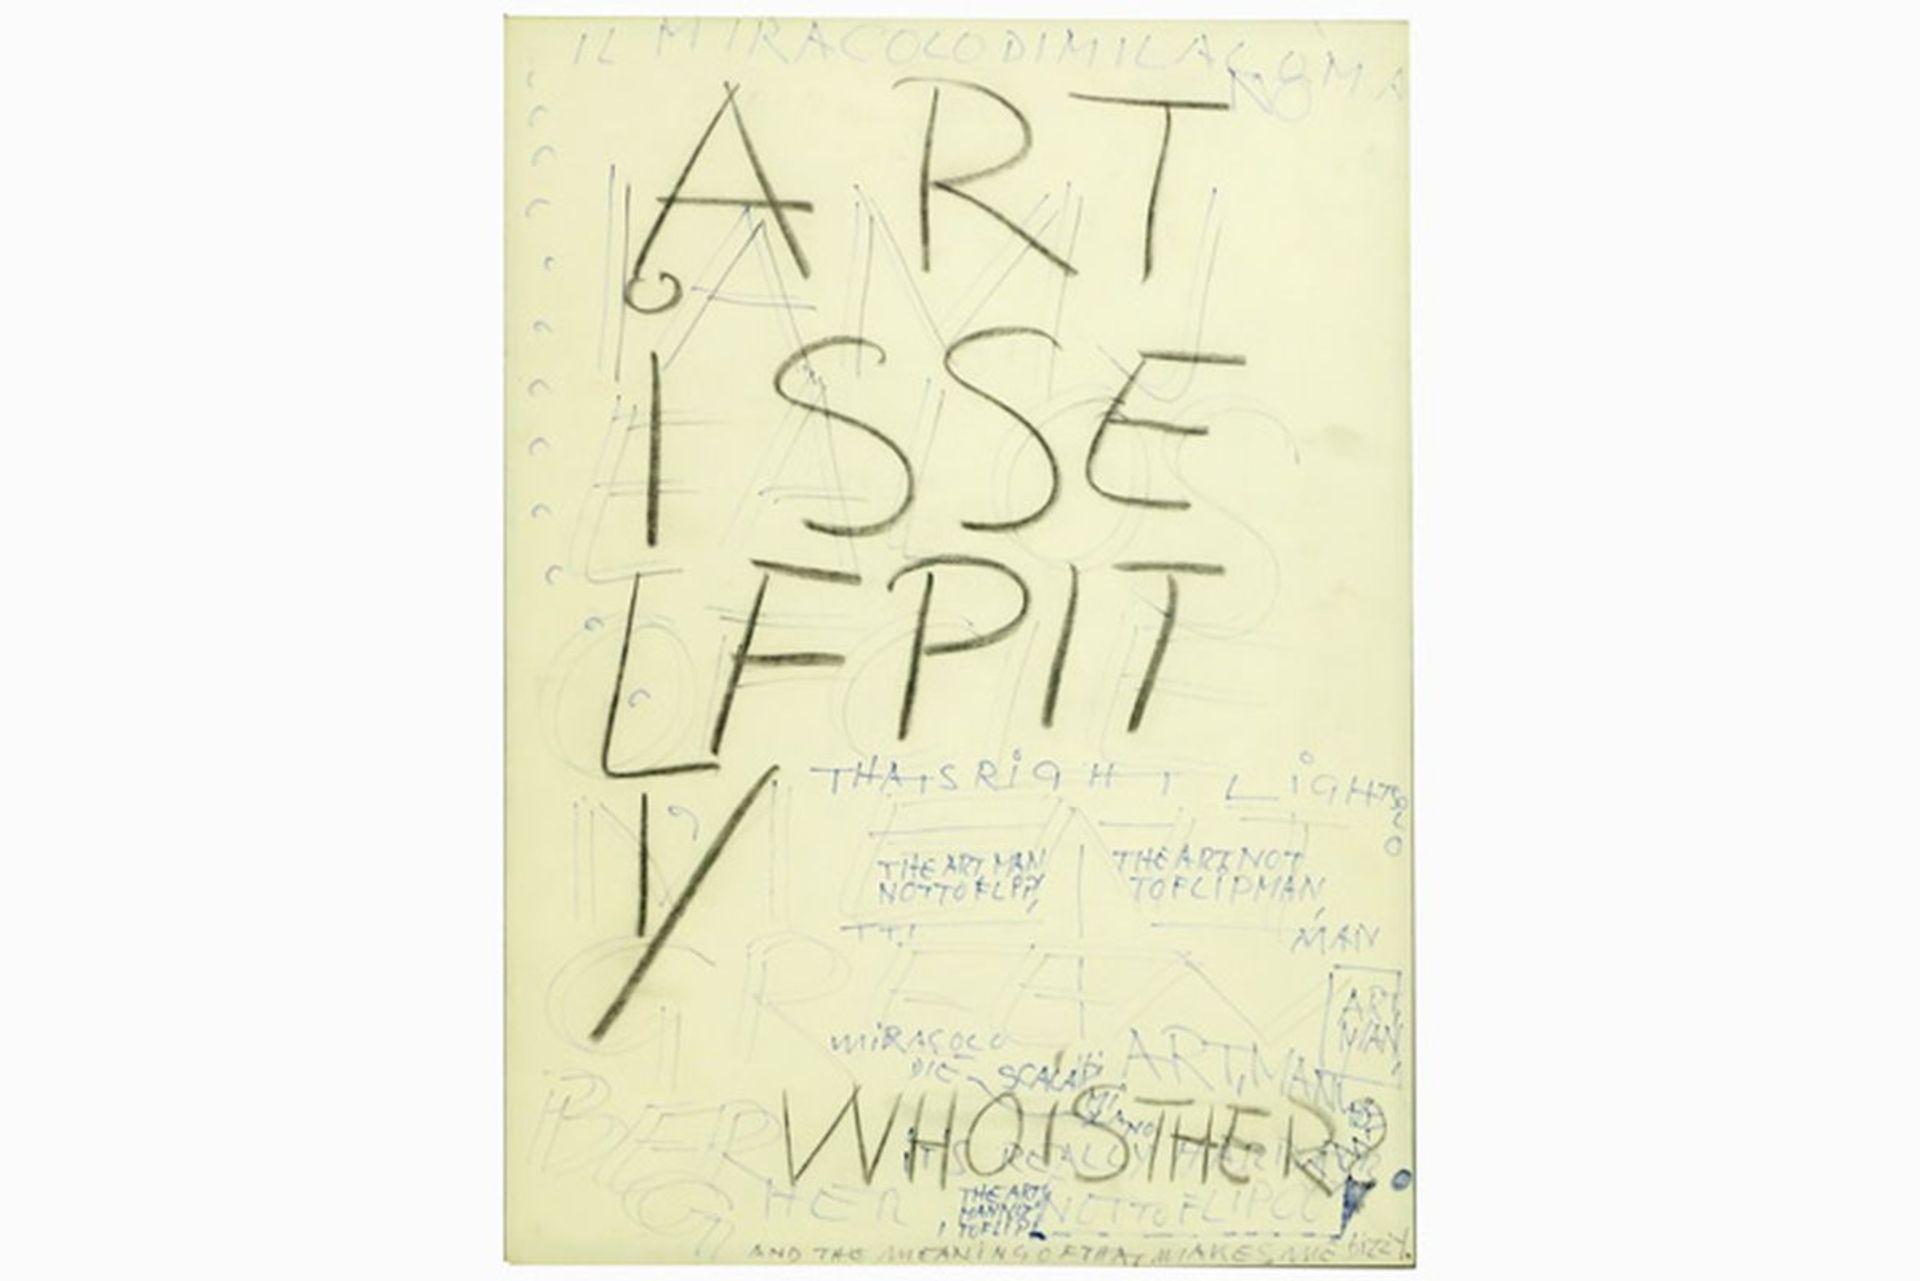 Jochen Seidel "Art is self pity" mixed media "word drawing" to be dated in his New [...] - Image 2 of 2